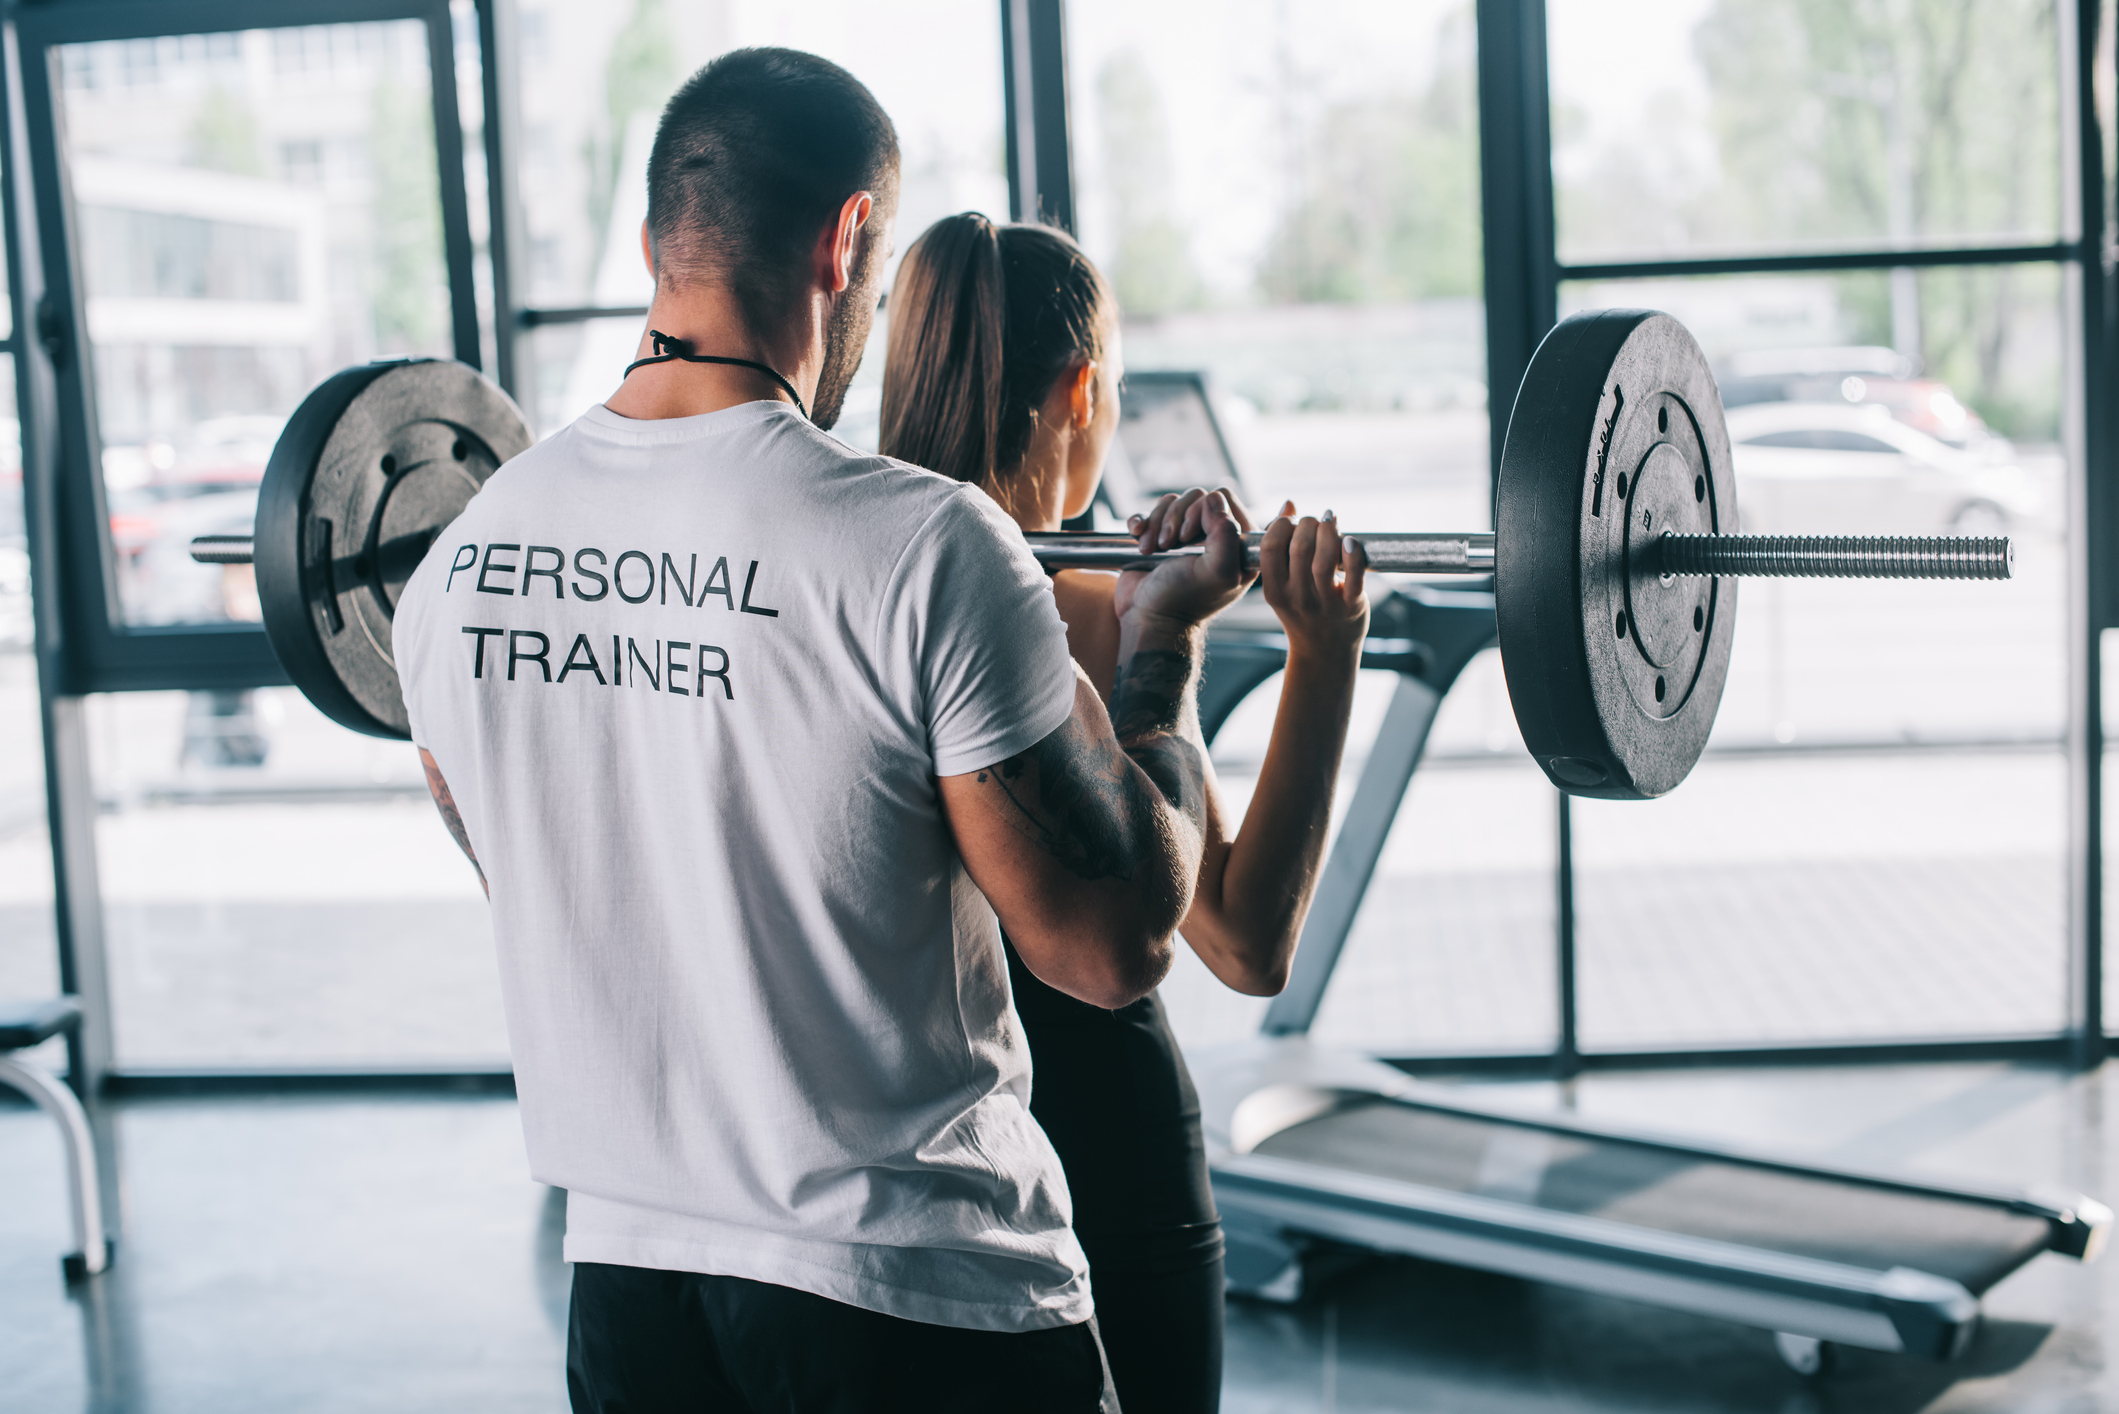 Personal trainer helping a client; starting a fitness business